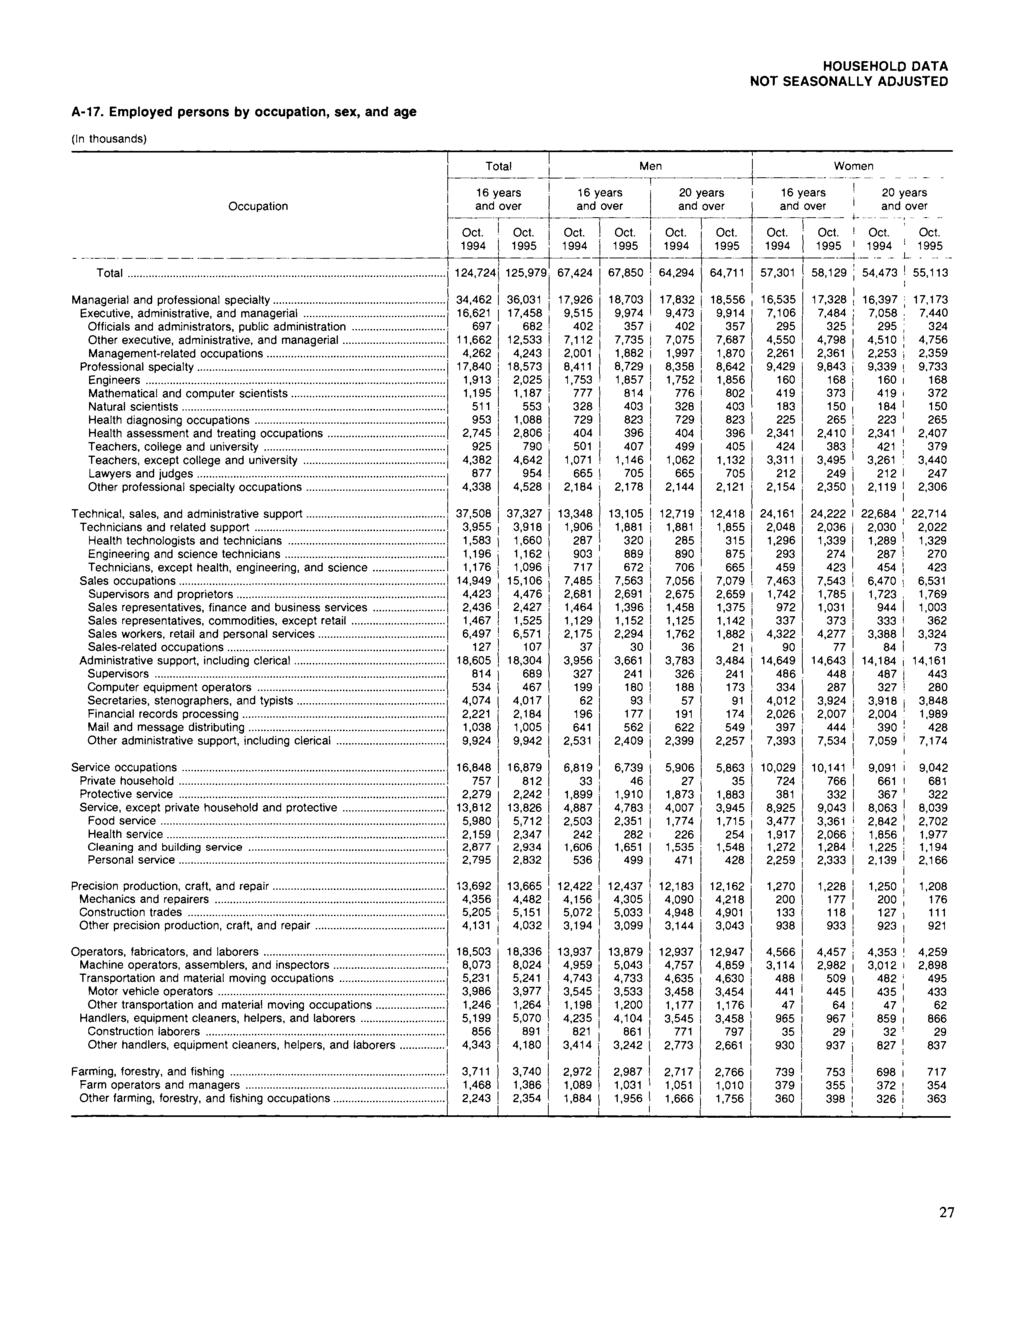 HOUSEHOLD DATA NOT SEASONALLY ADJUSTED A-17. Employed persons by occupation, sex, and age (n thousands) Occupation Total 16 years and over 16 years and over Men!